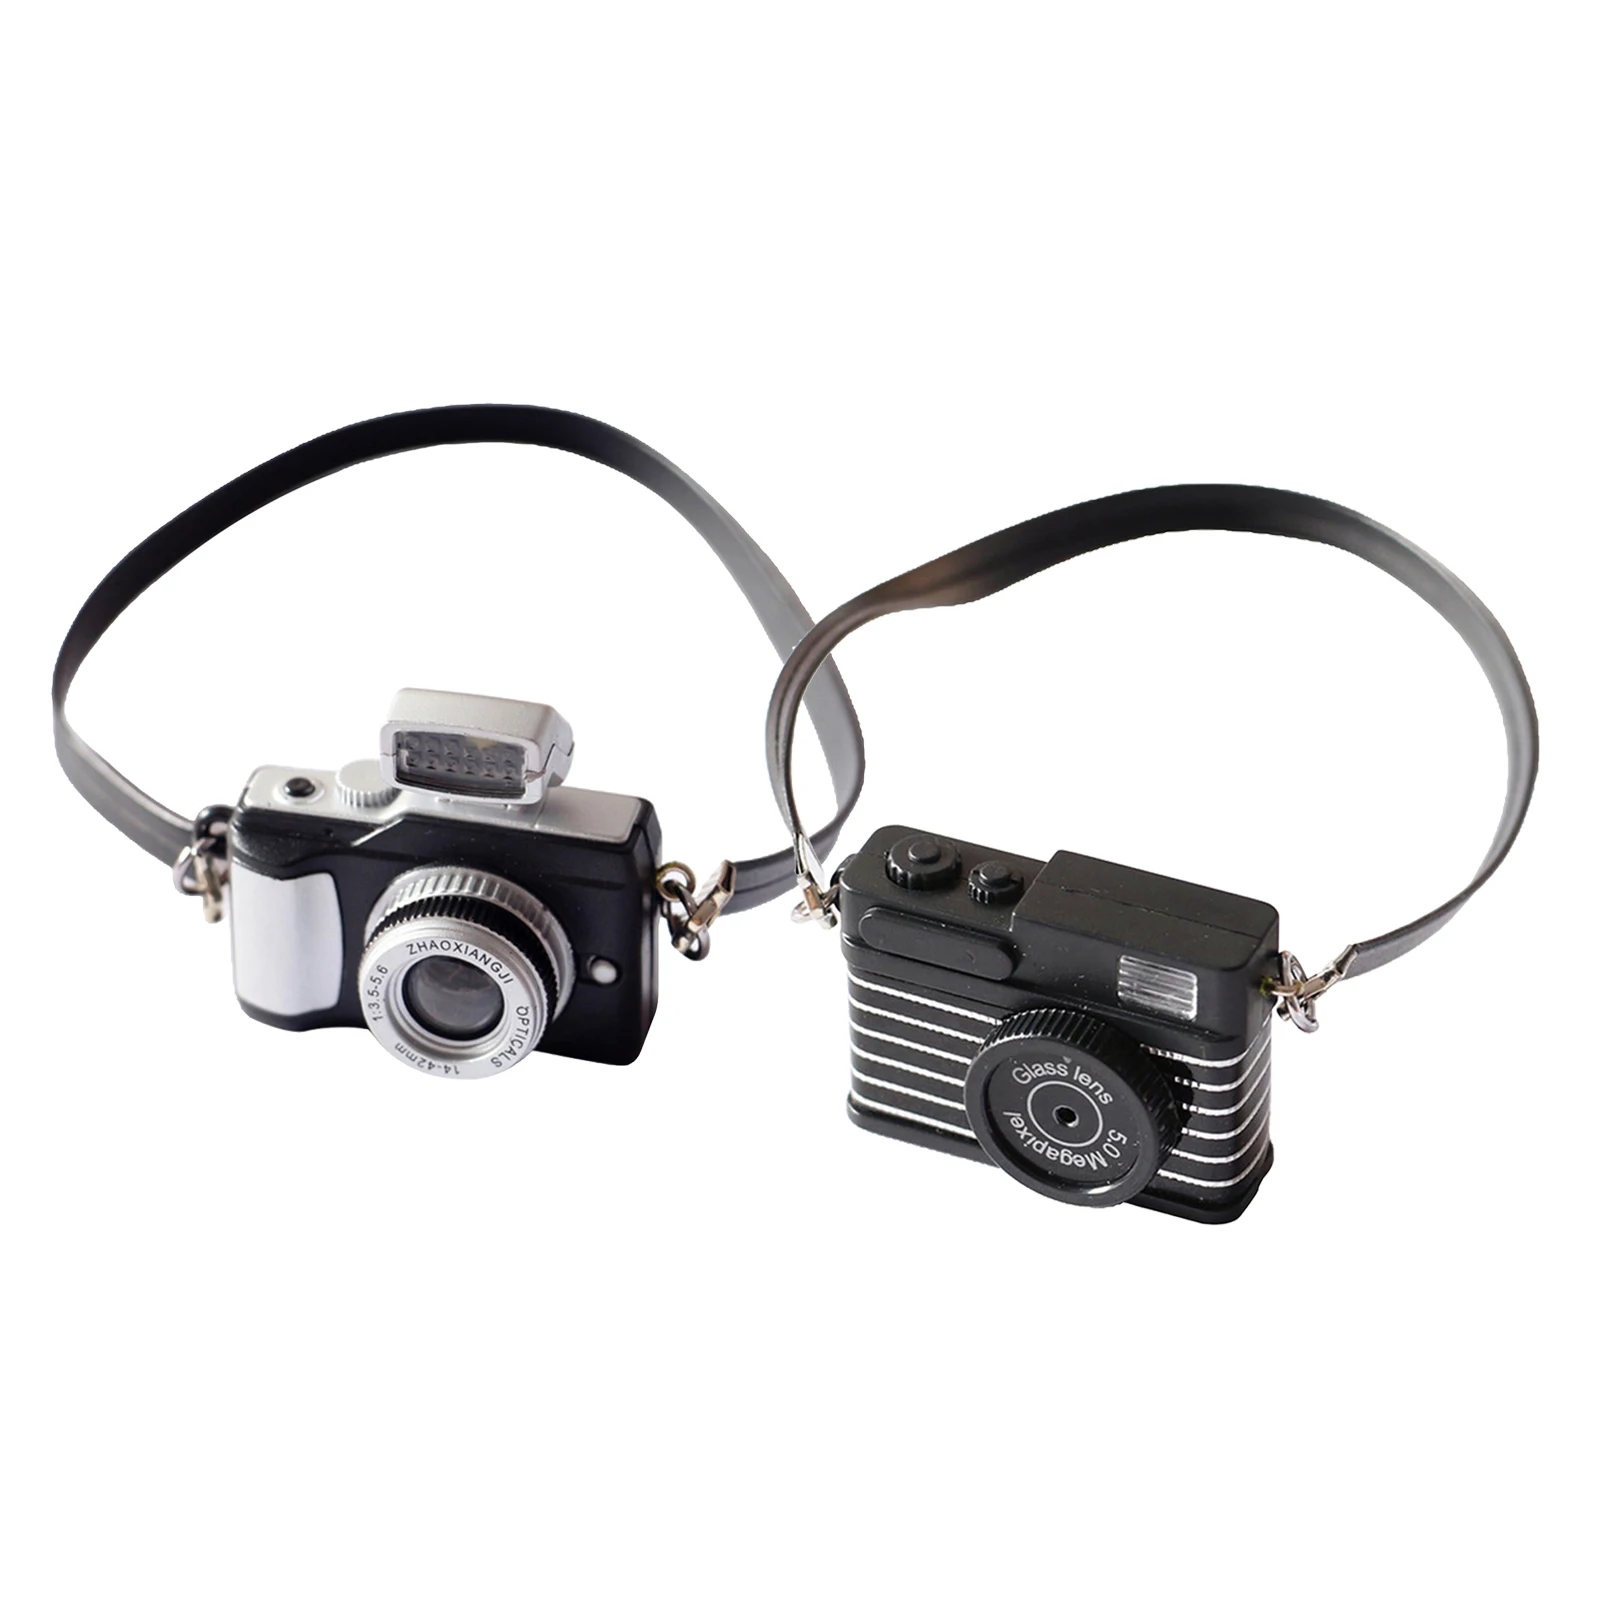 Details about   Miniature Digital Camera Black Mini SLR Toy Dollhouse Gift Accessory 